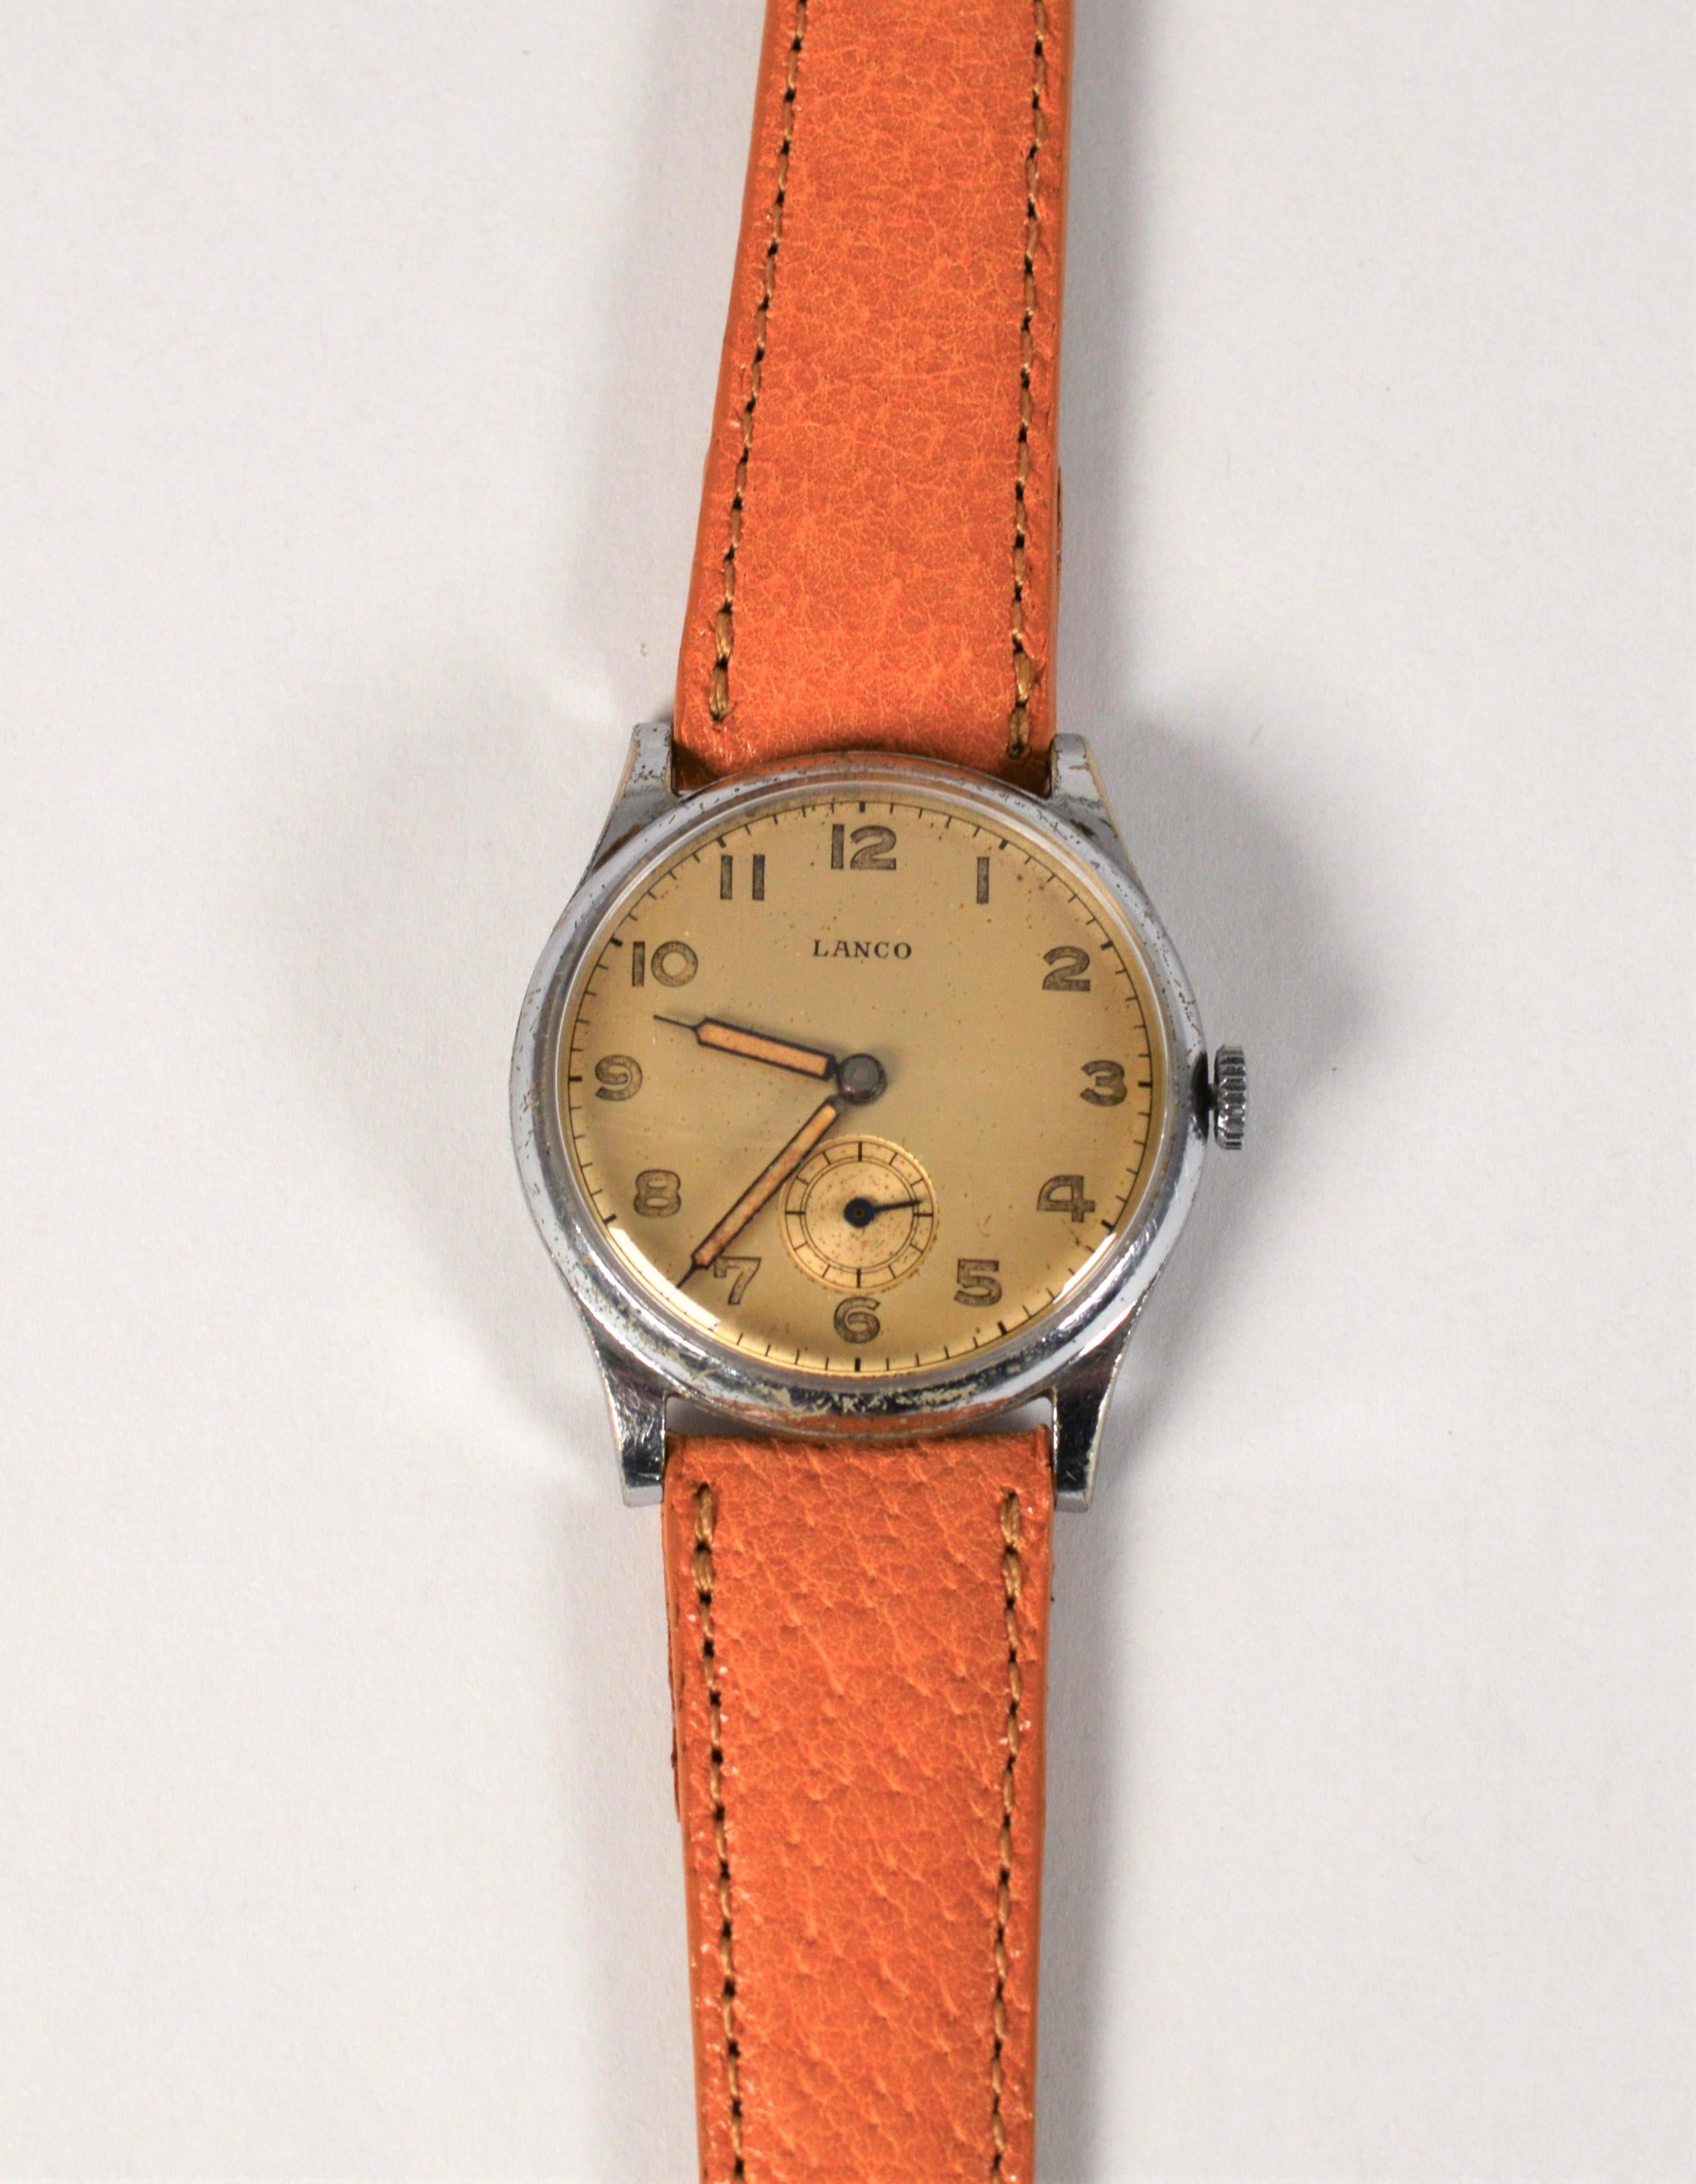 Vintage with character, this Lanco Stainless Steel Wrist Watch is well preserved and was popular with the German Army during WWII. The timepiece features a satin gold-tone face with easy to read Arabic numeral indexes and subsidiary dial.  In size